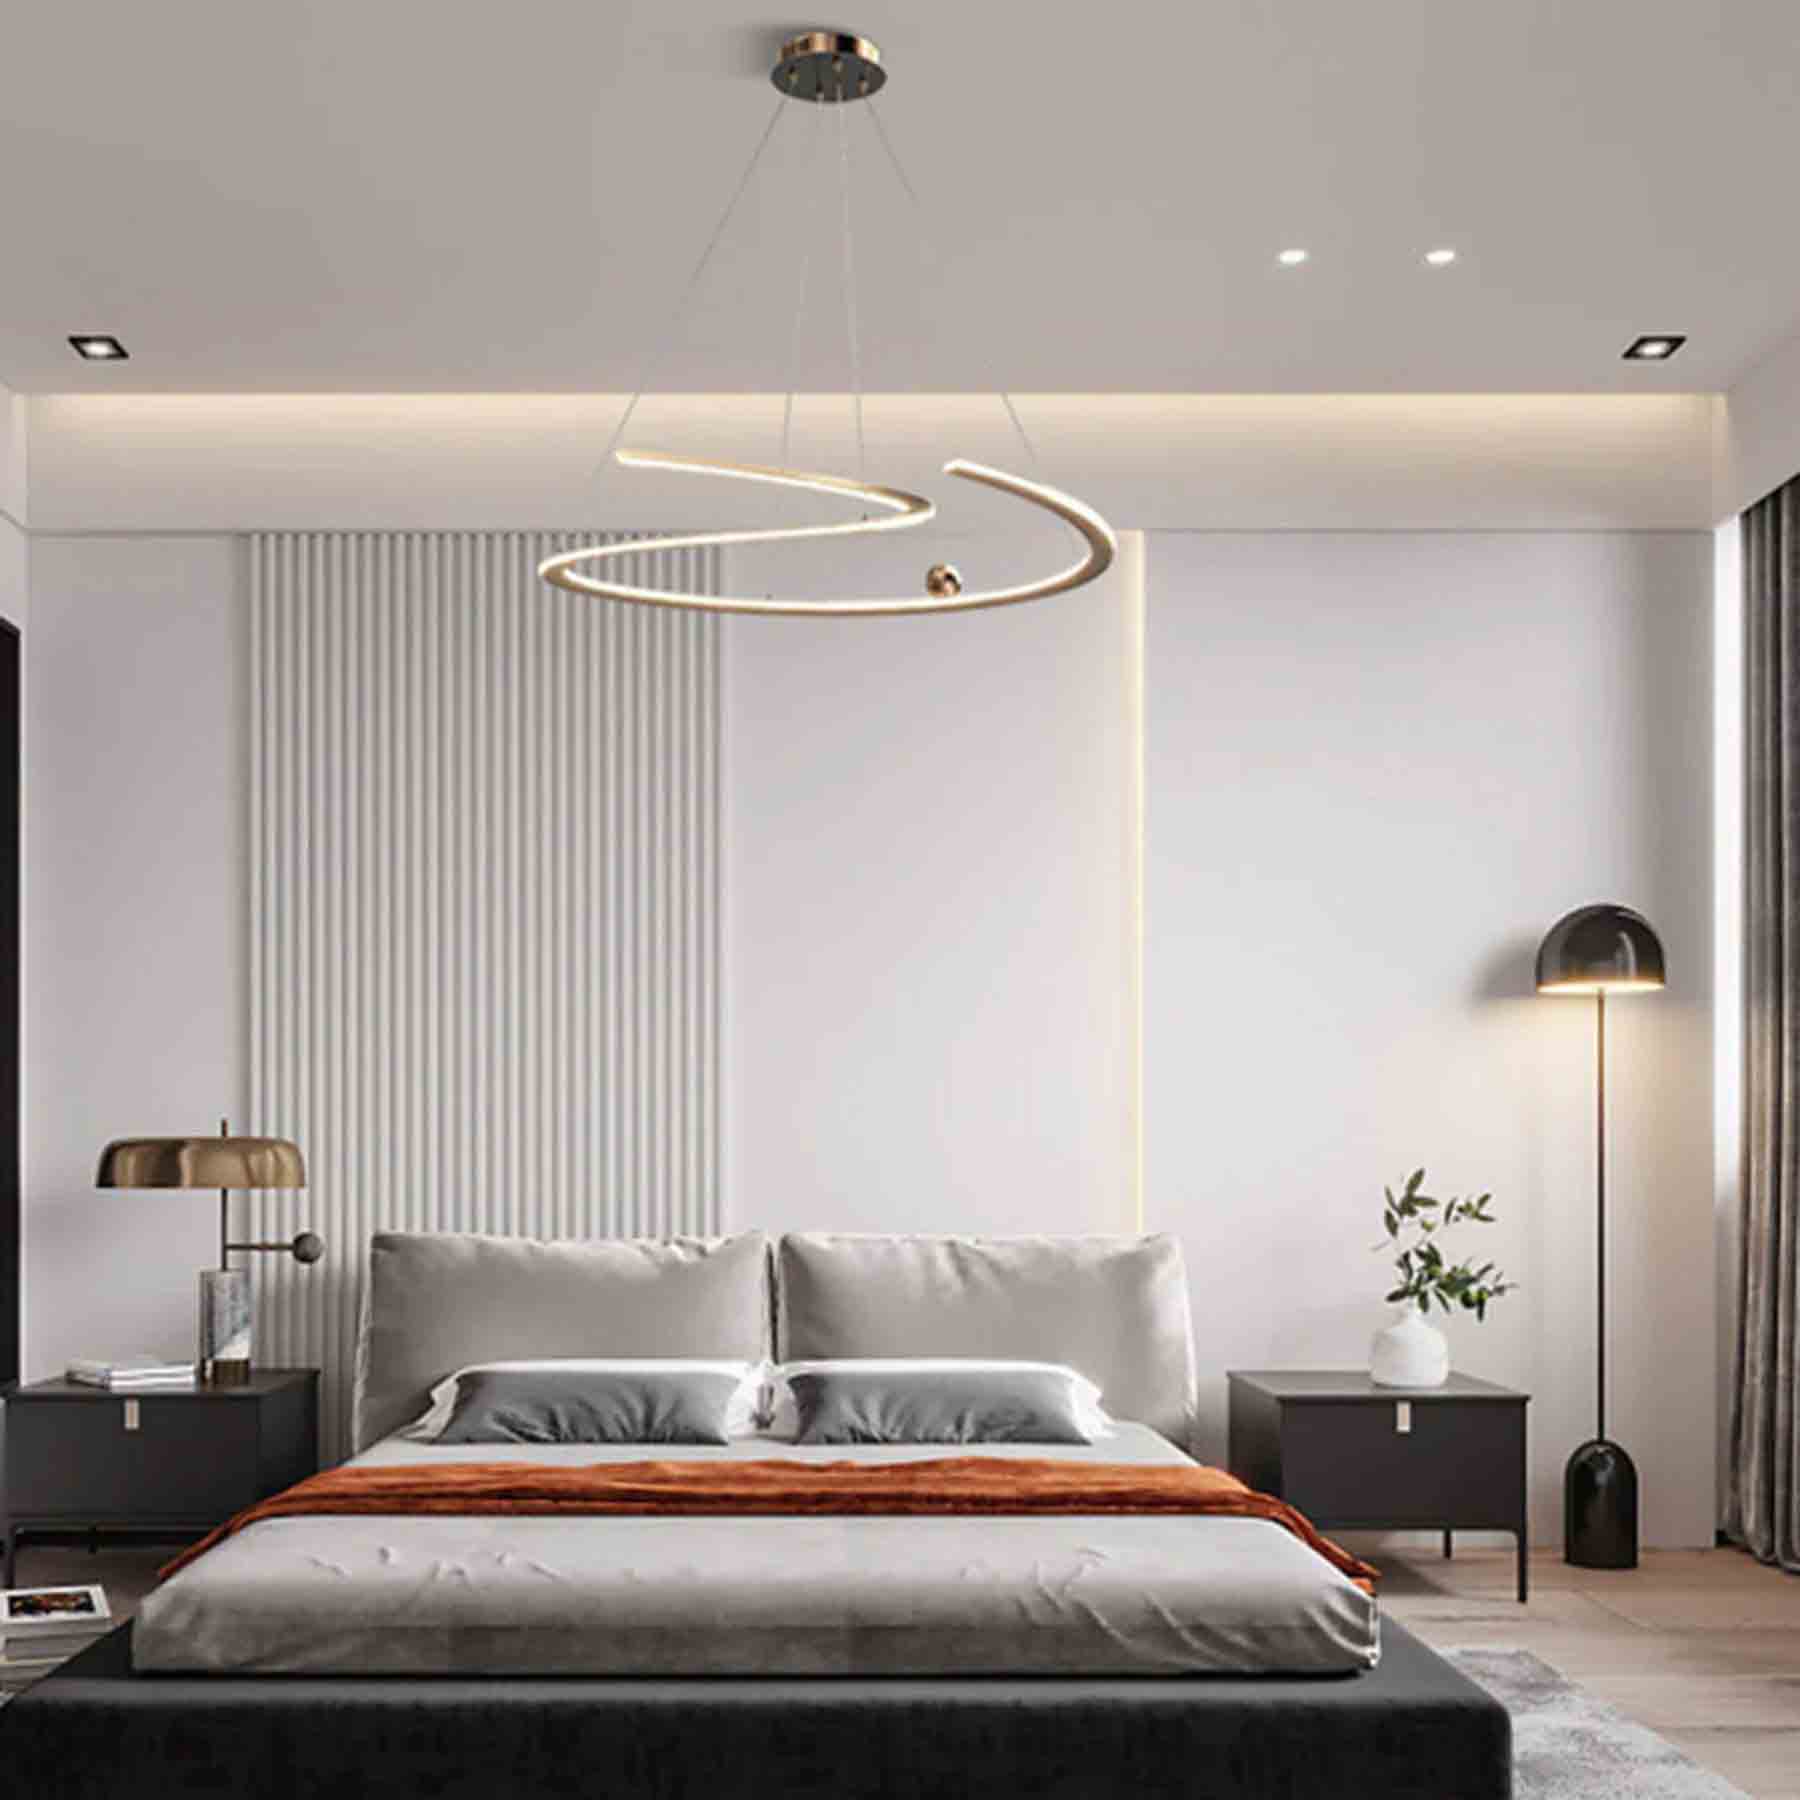 infuse a modern touch into your room by opting for this essential light fixture